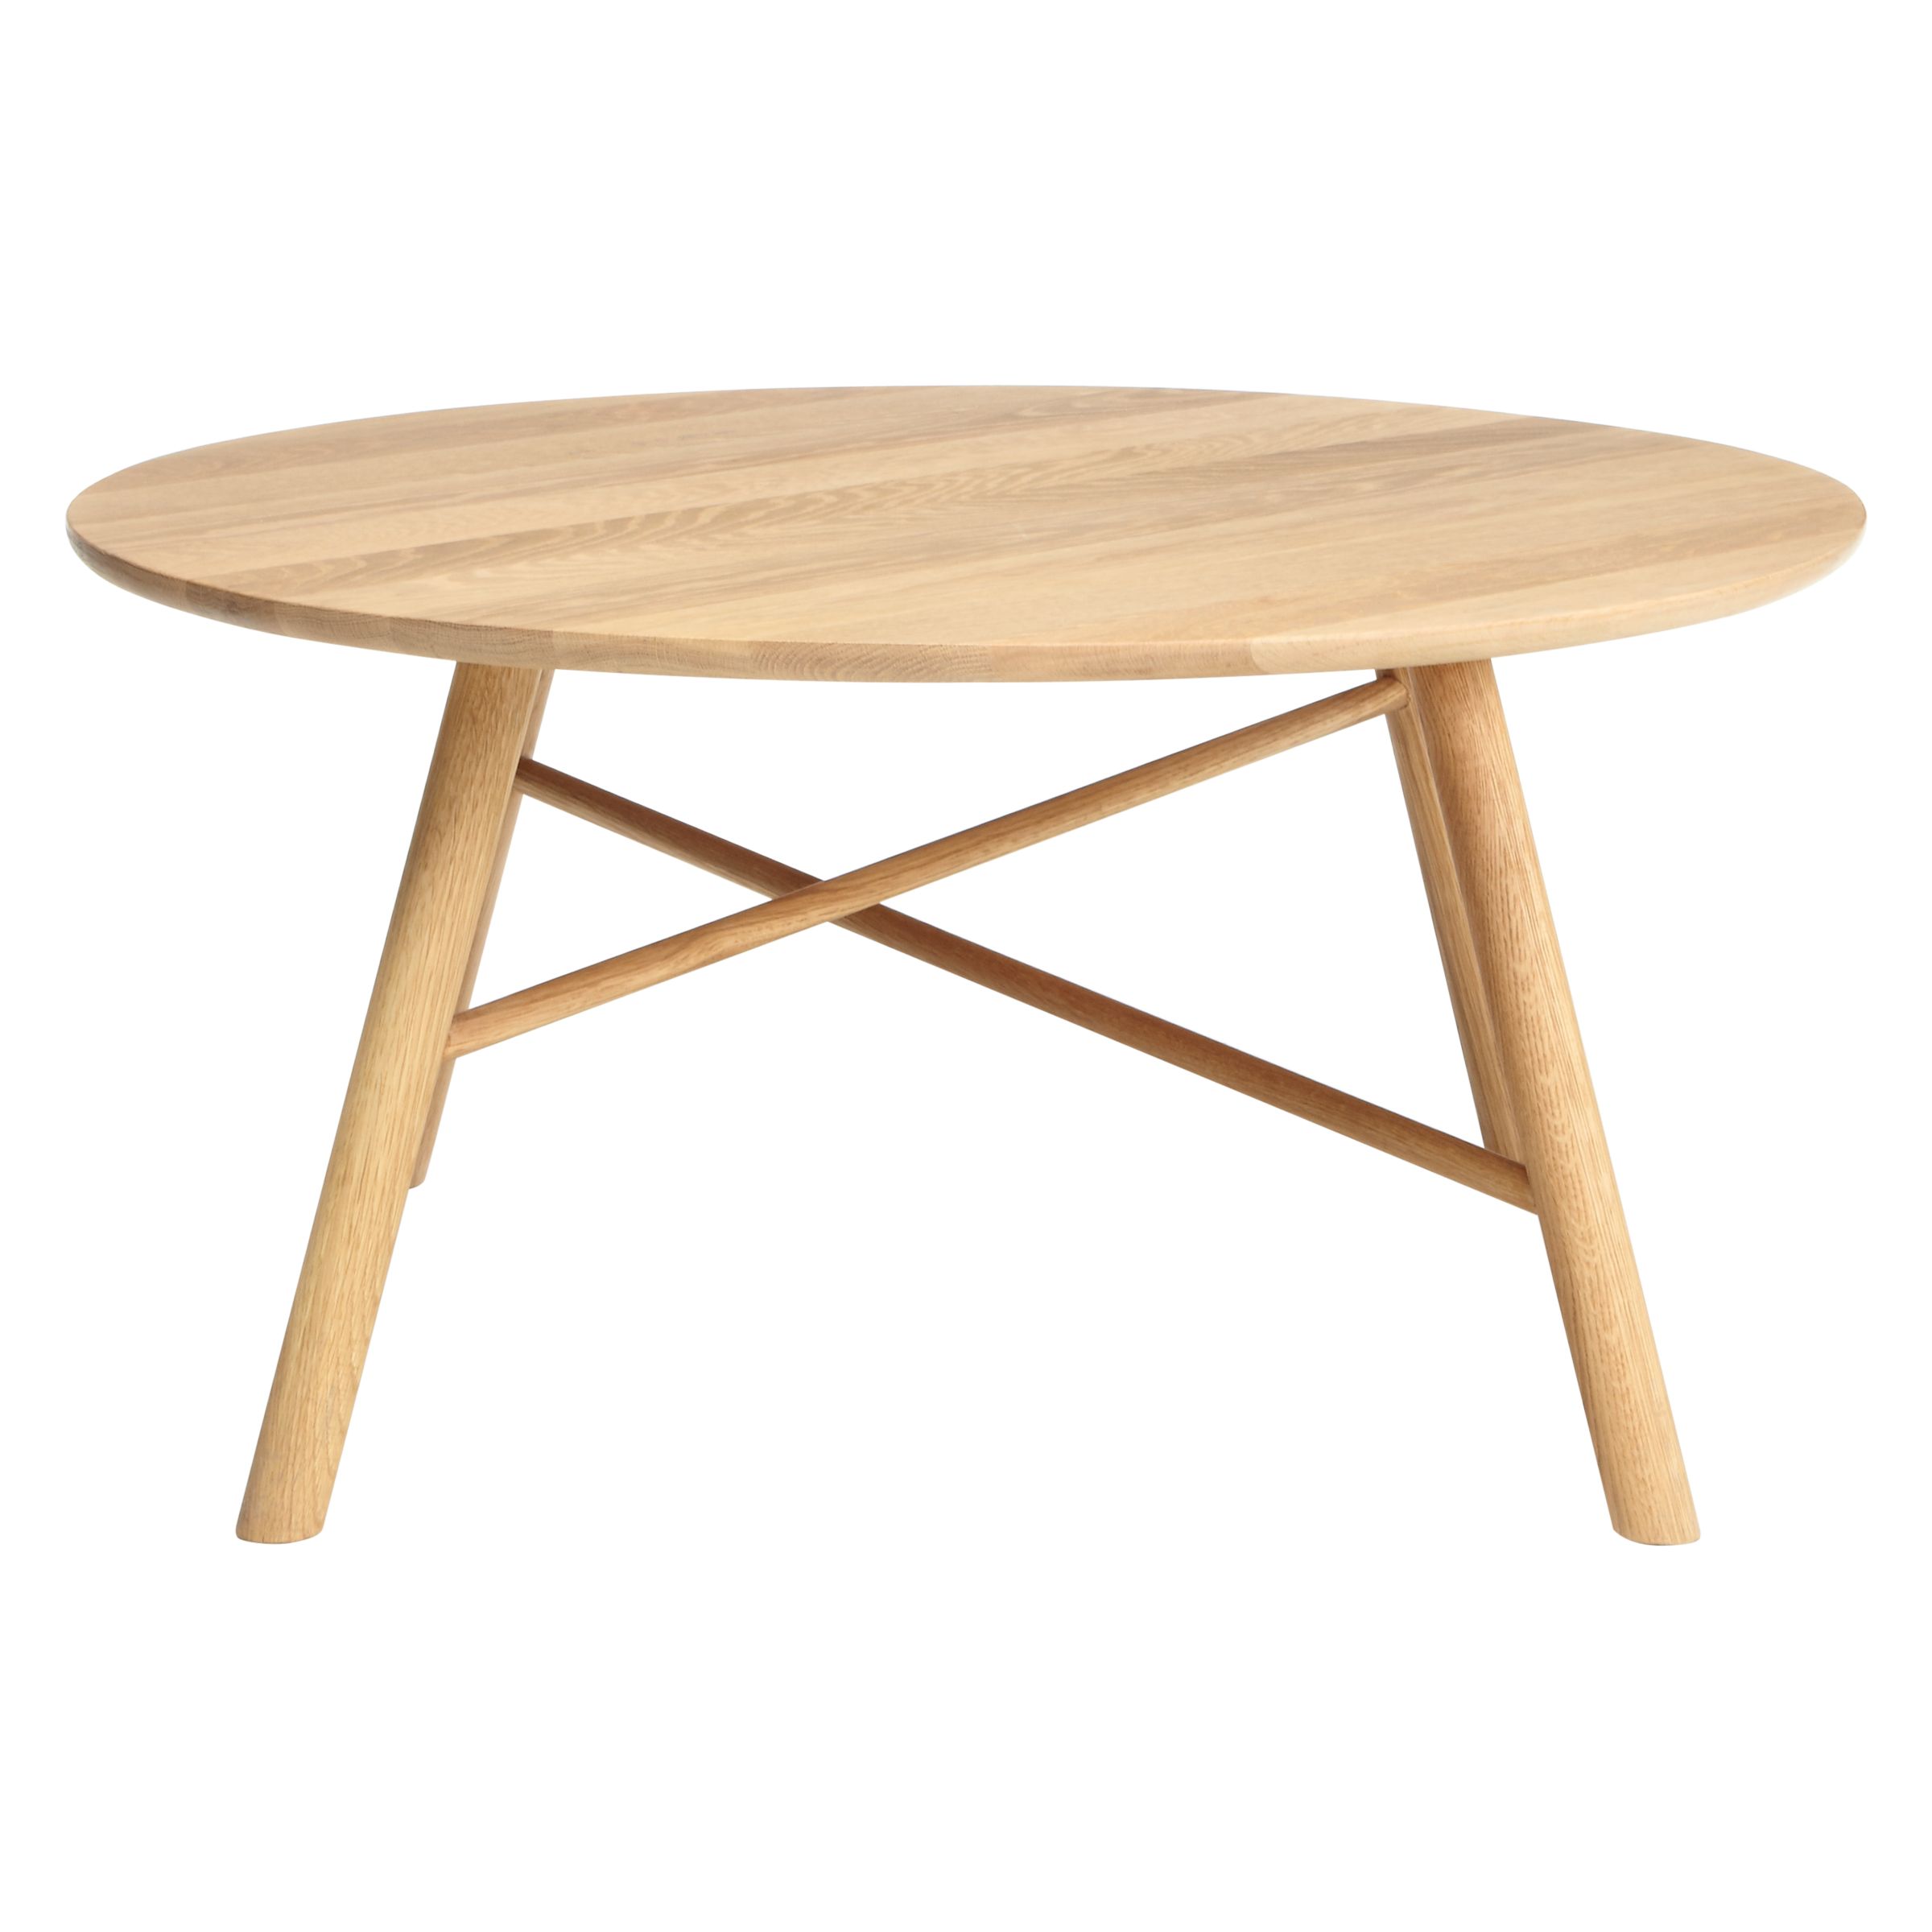 Says Who for John Lewis Why Wood Coffee Table, Oak at John Lewis & Partners